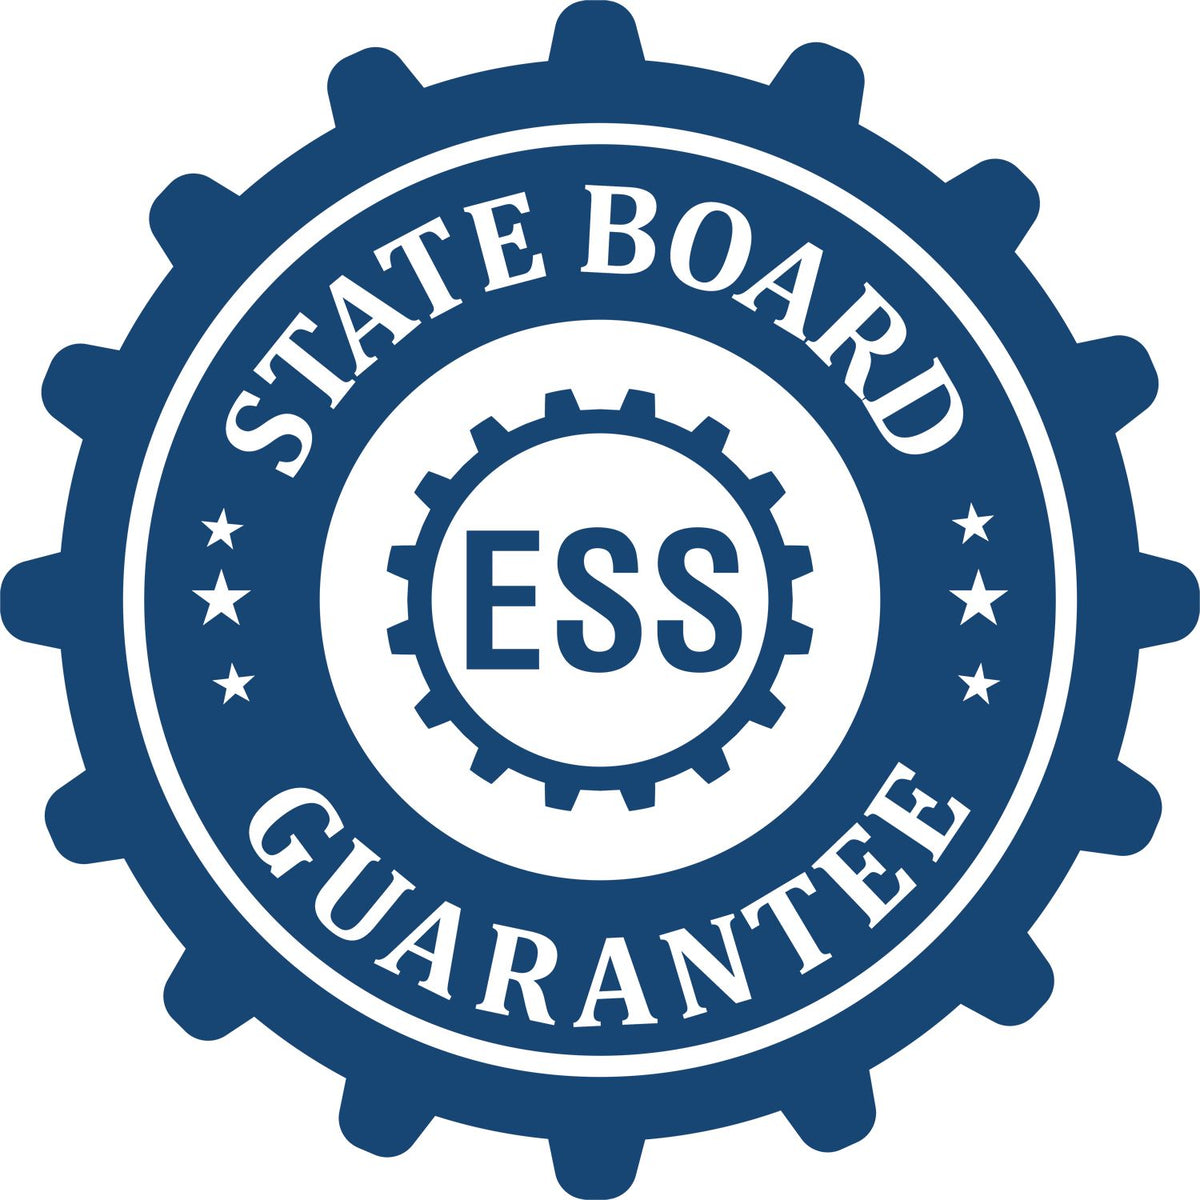 An emblem in a gear shape illustrating a state board guarantee for the State of North Carolina Extended Long Reach Geologist Seal